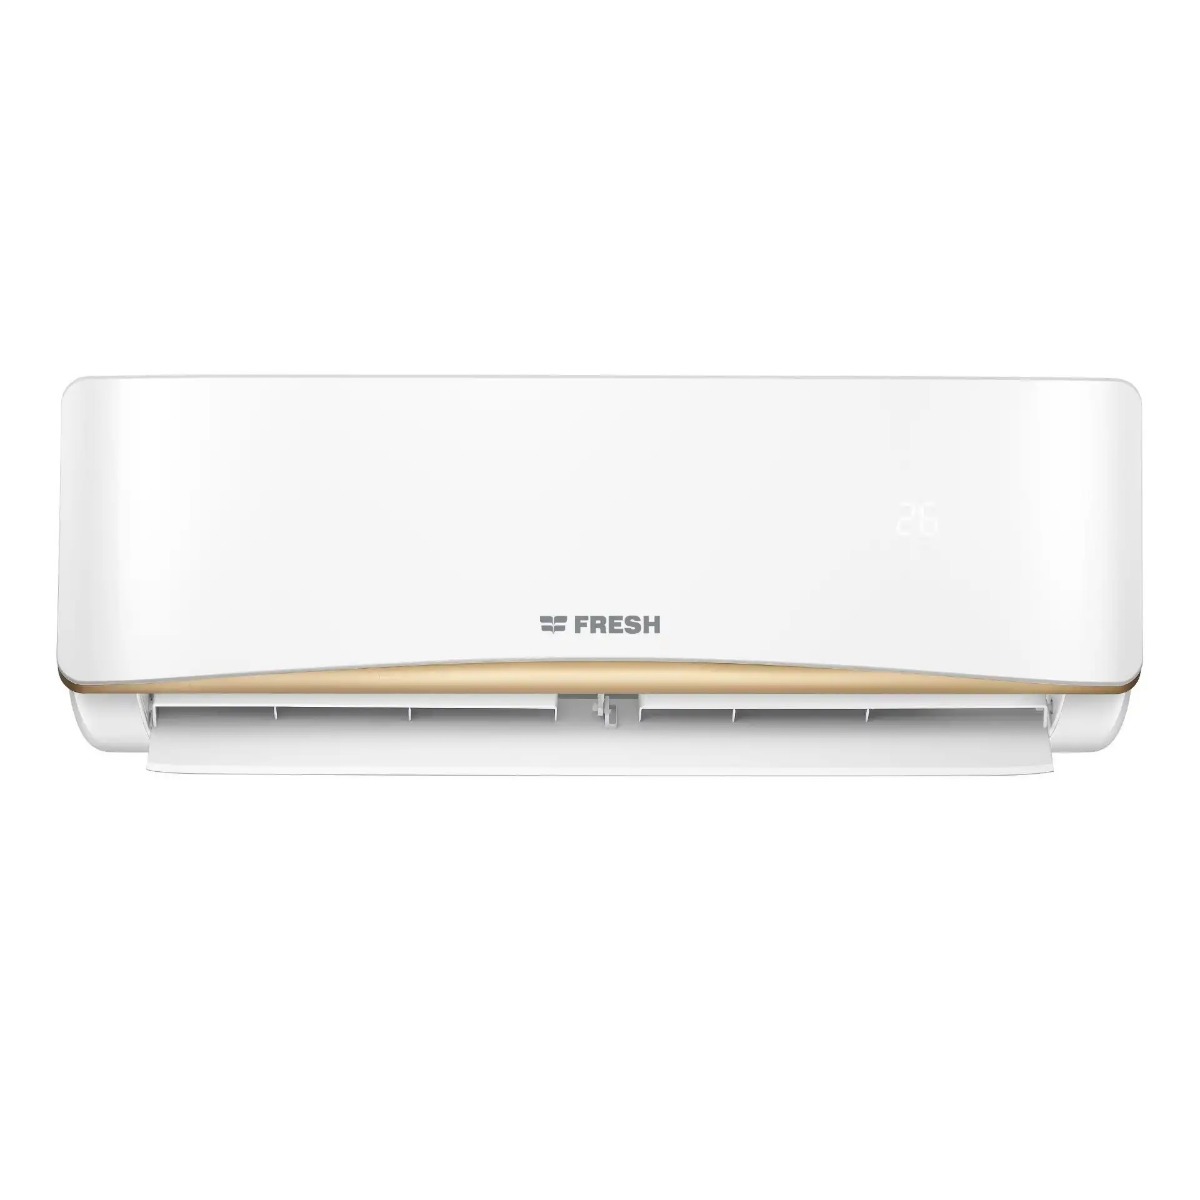 Fresh Split Air Conditioner, 5H, Cooling and Heating, White - 1AFRACWLPUFW36HIL001